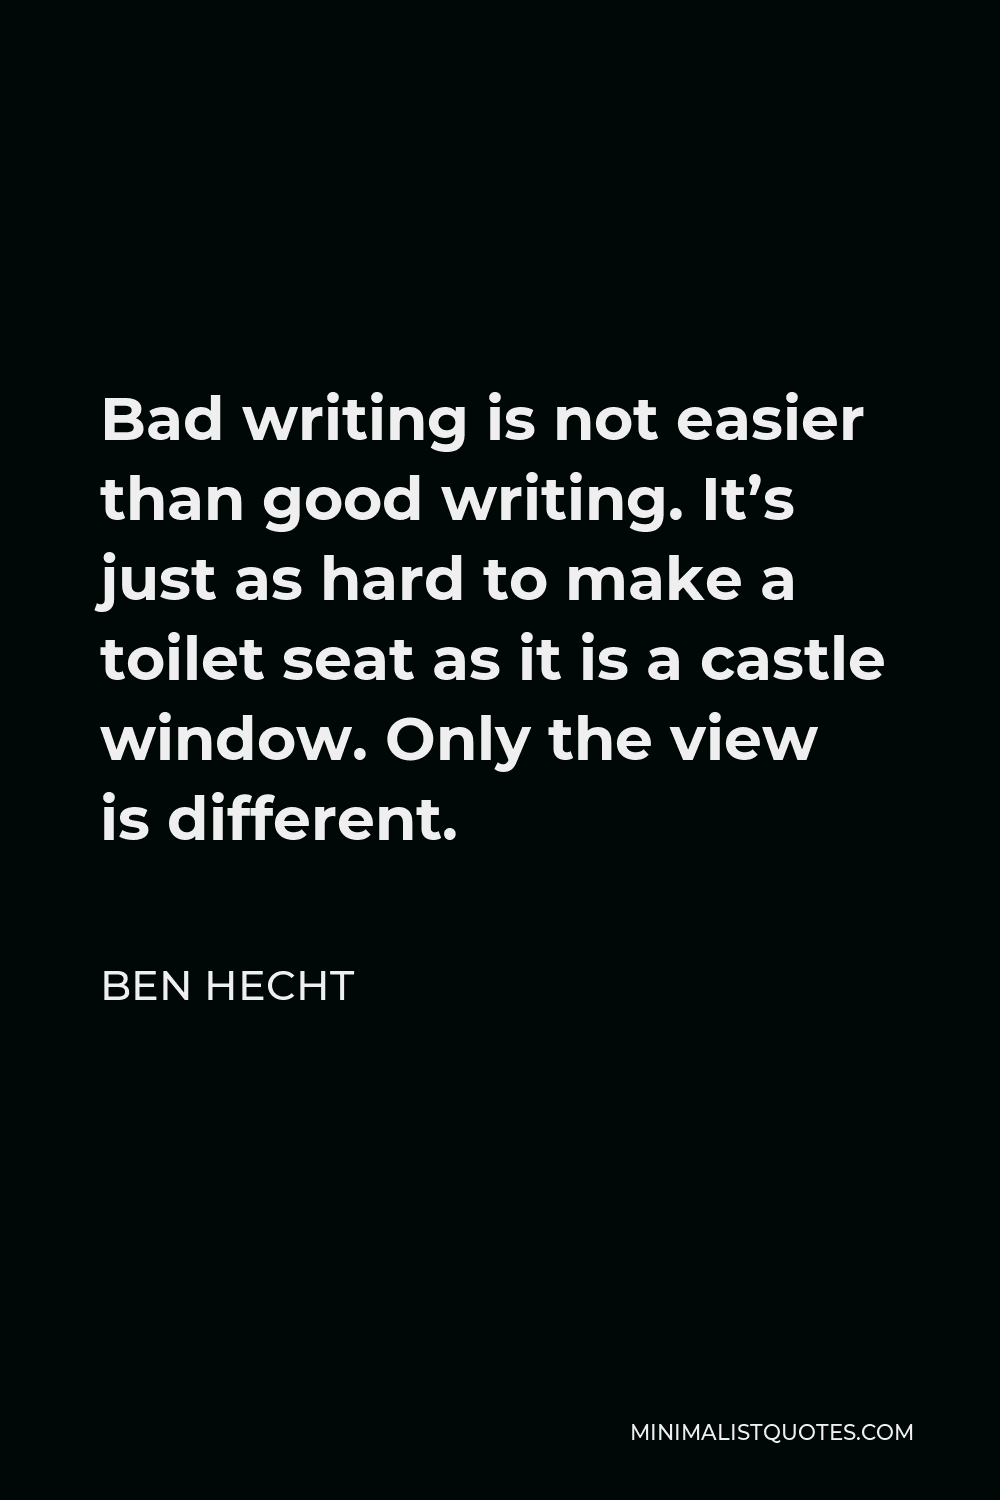 Ben Hecht Quote - Bad writing is not easier than good writing. It’s just as hard to make a toilet seat as it is a castle window. Only the view is different.